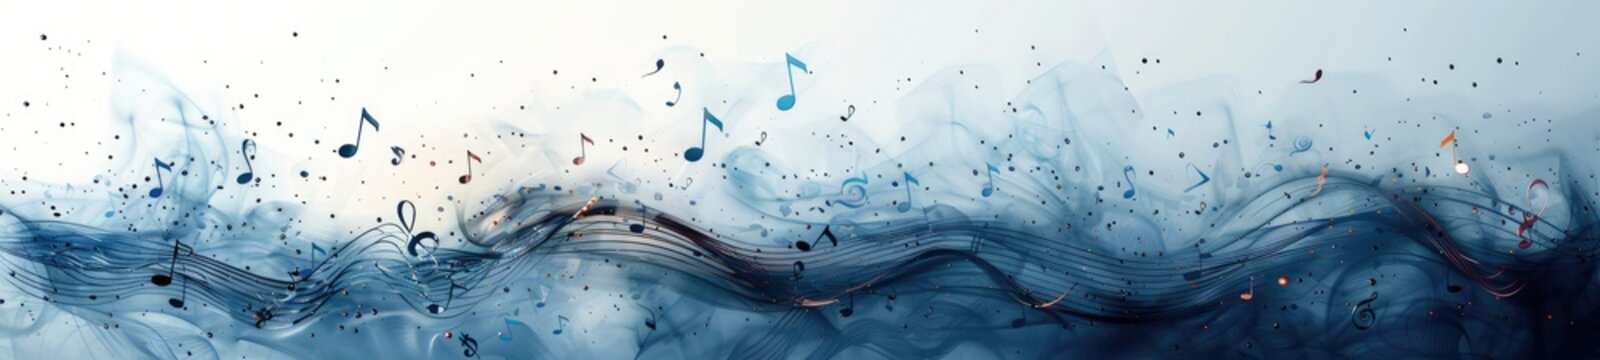 Abstract magical musical notes floating